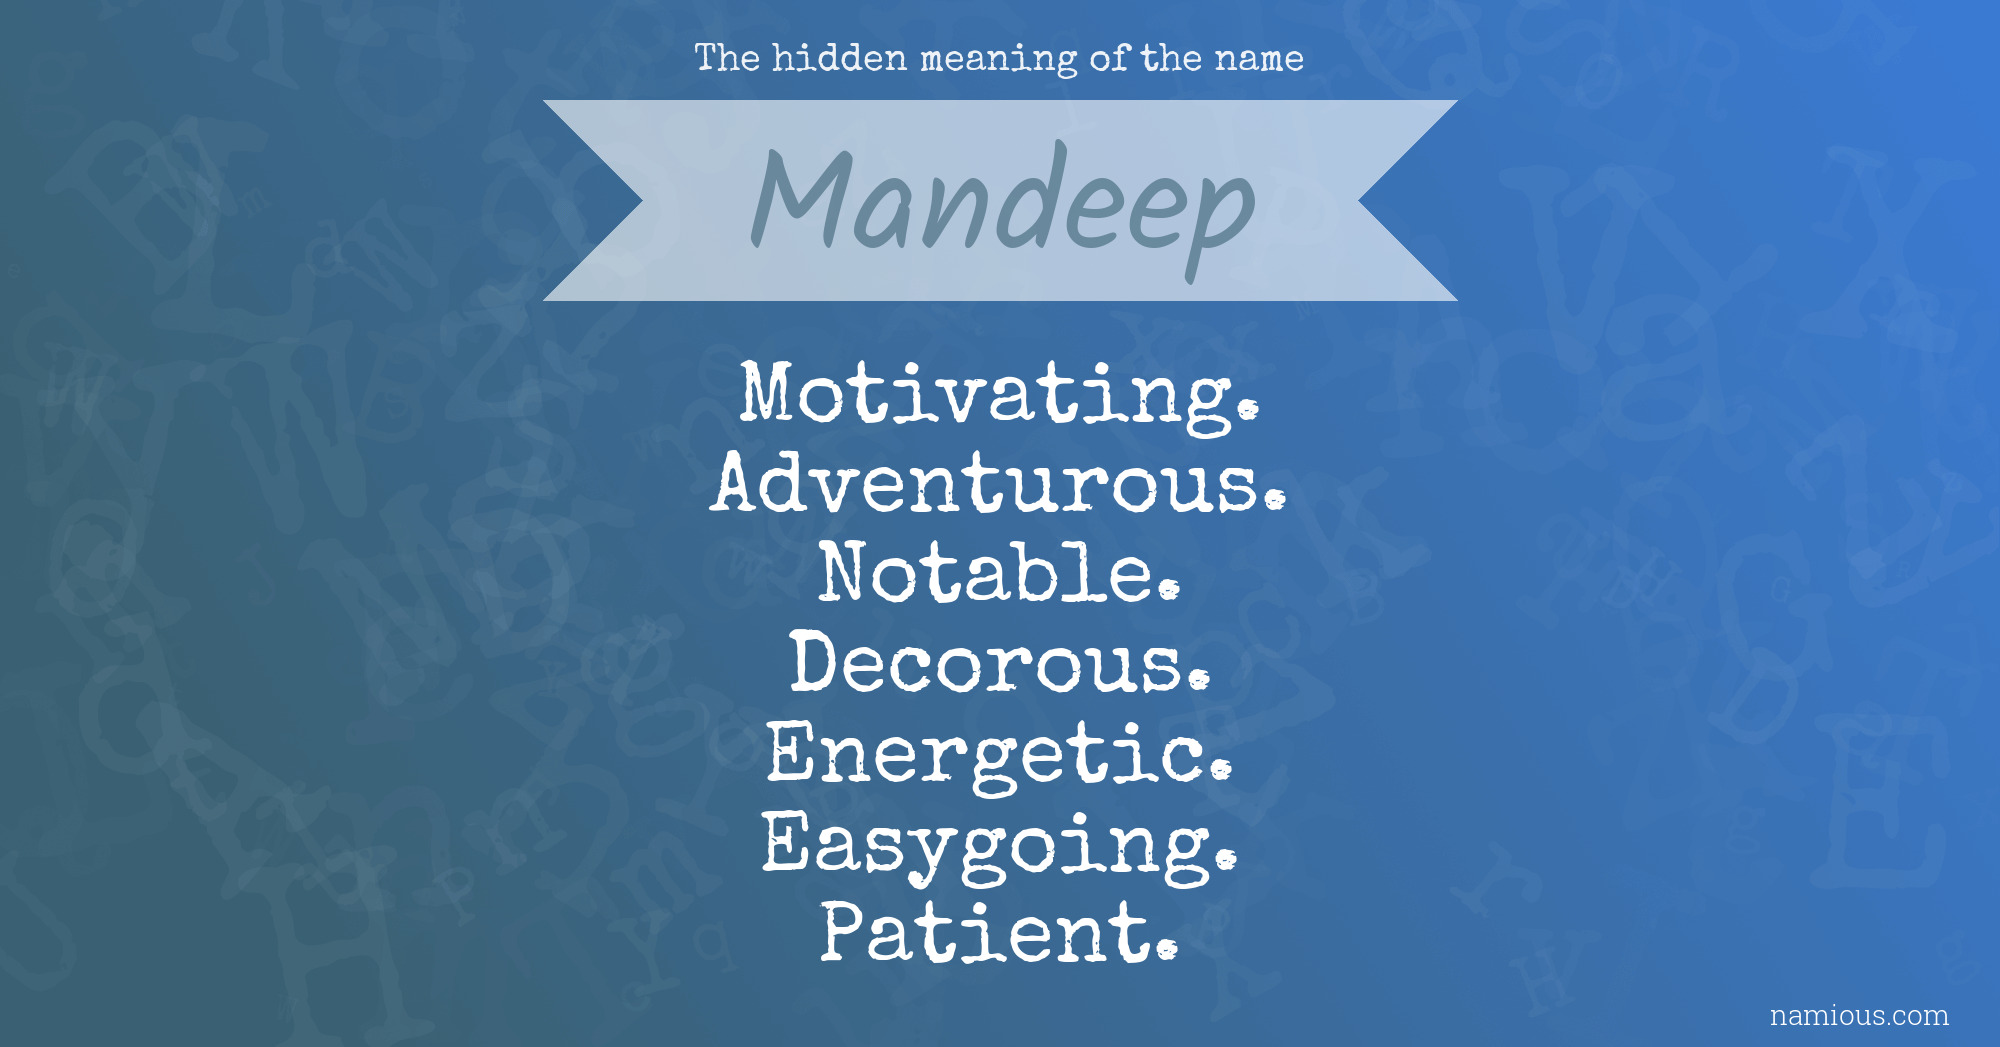 The hidden meaning of the name Mandeep